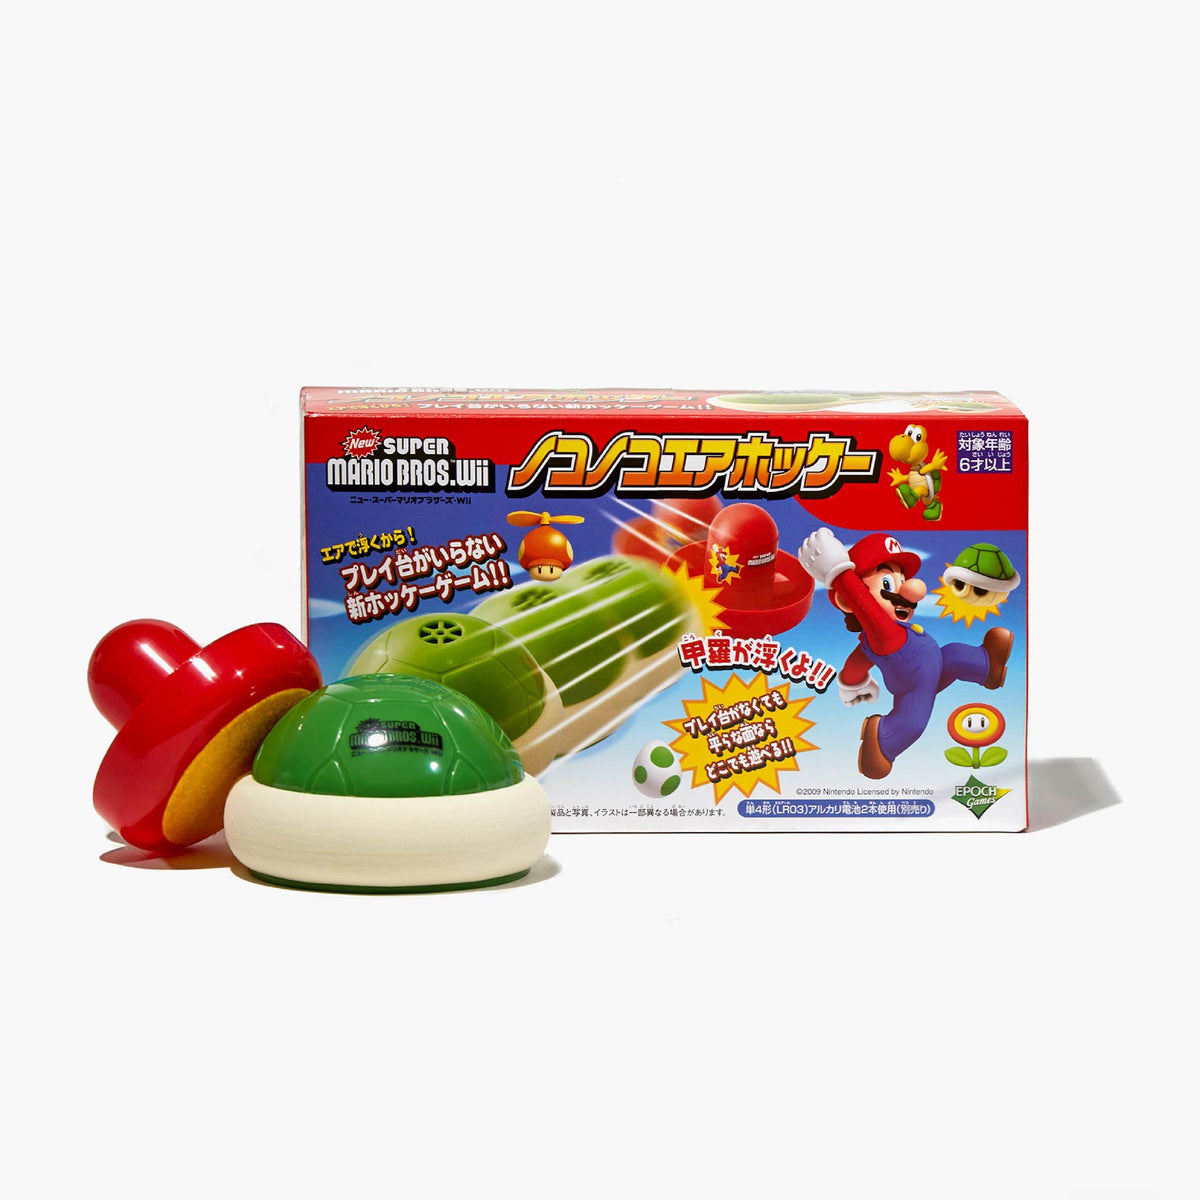 EPOCH Games Super Mario Bros Air Hockey Game New with Accessories New